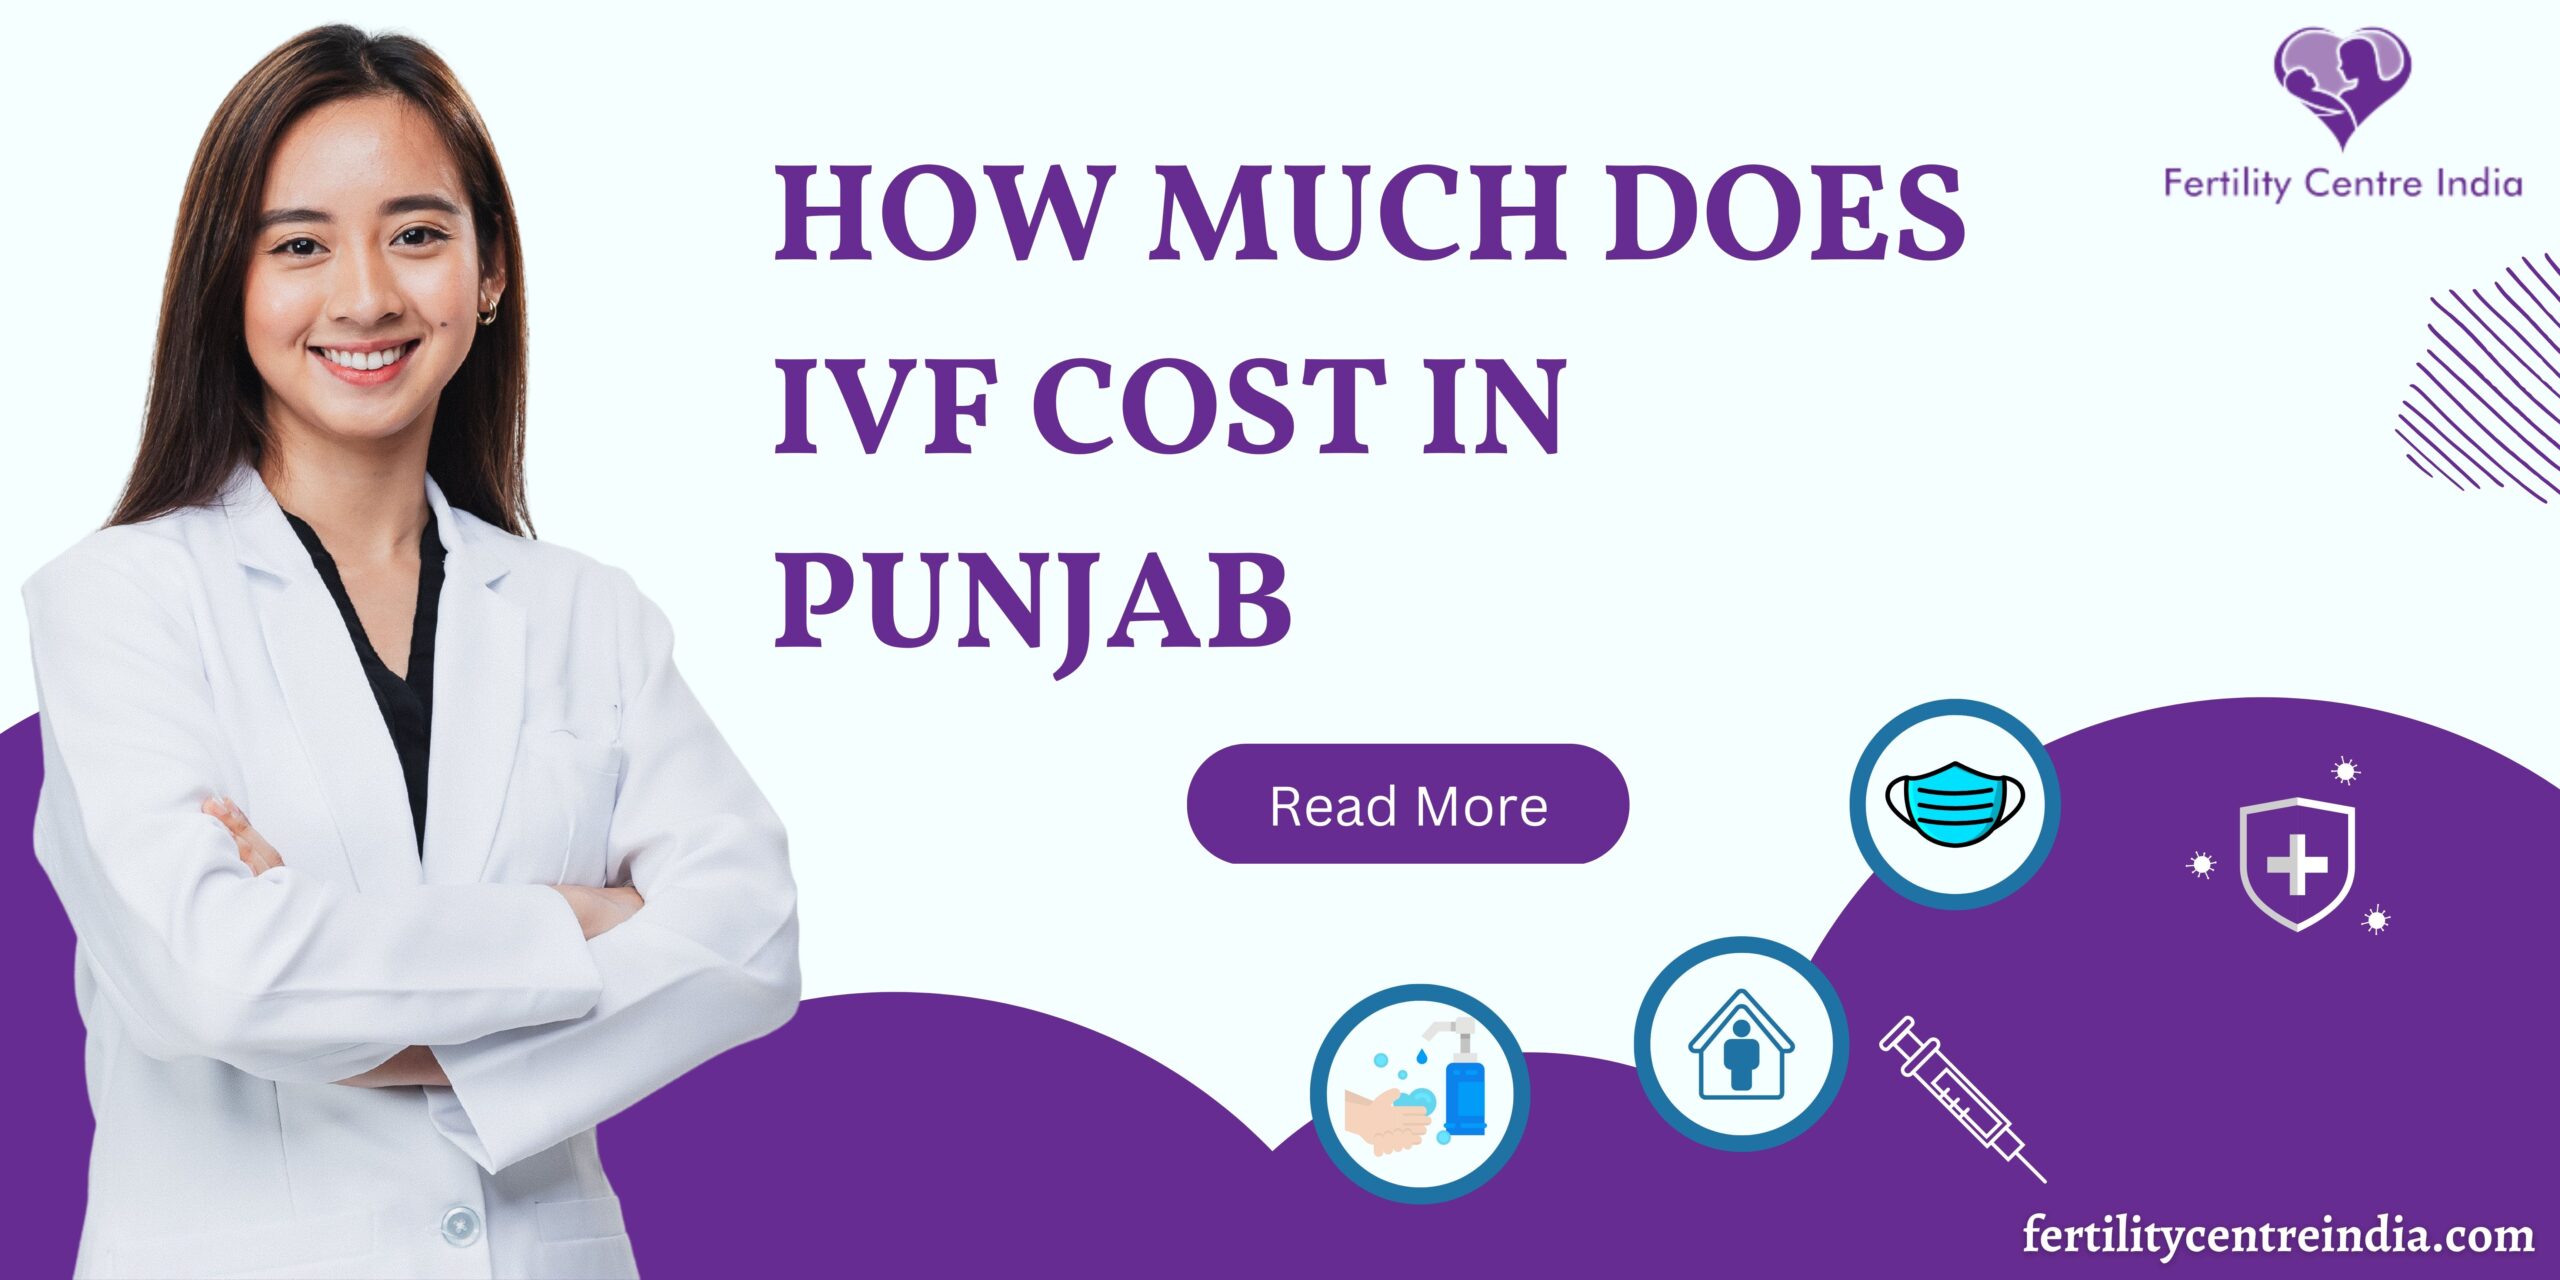 How much does IVF cost in Punjab